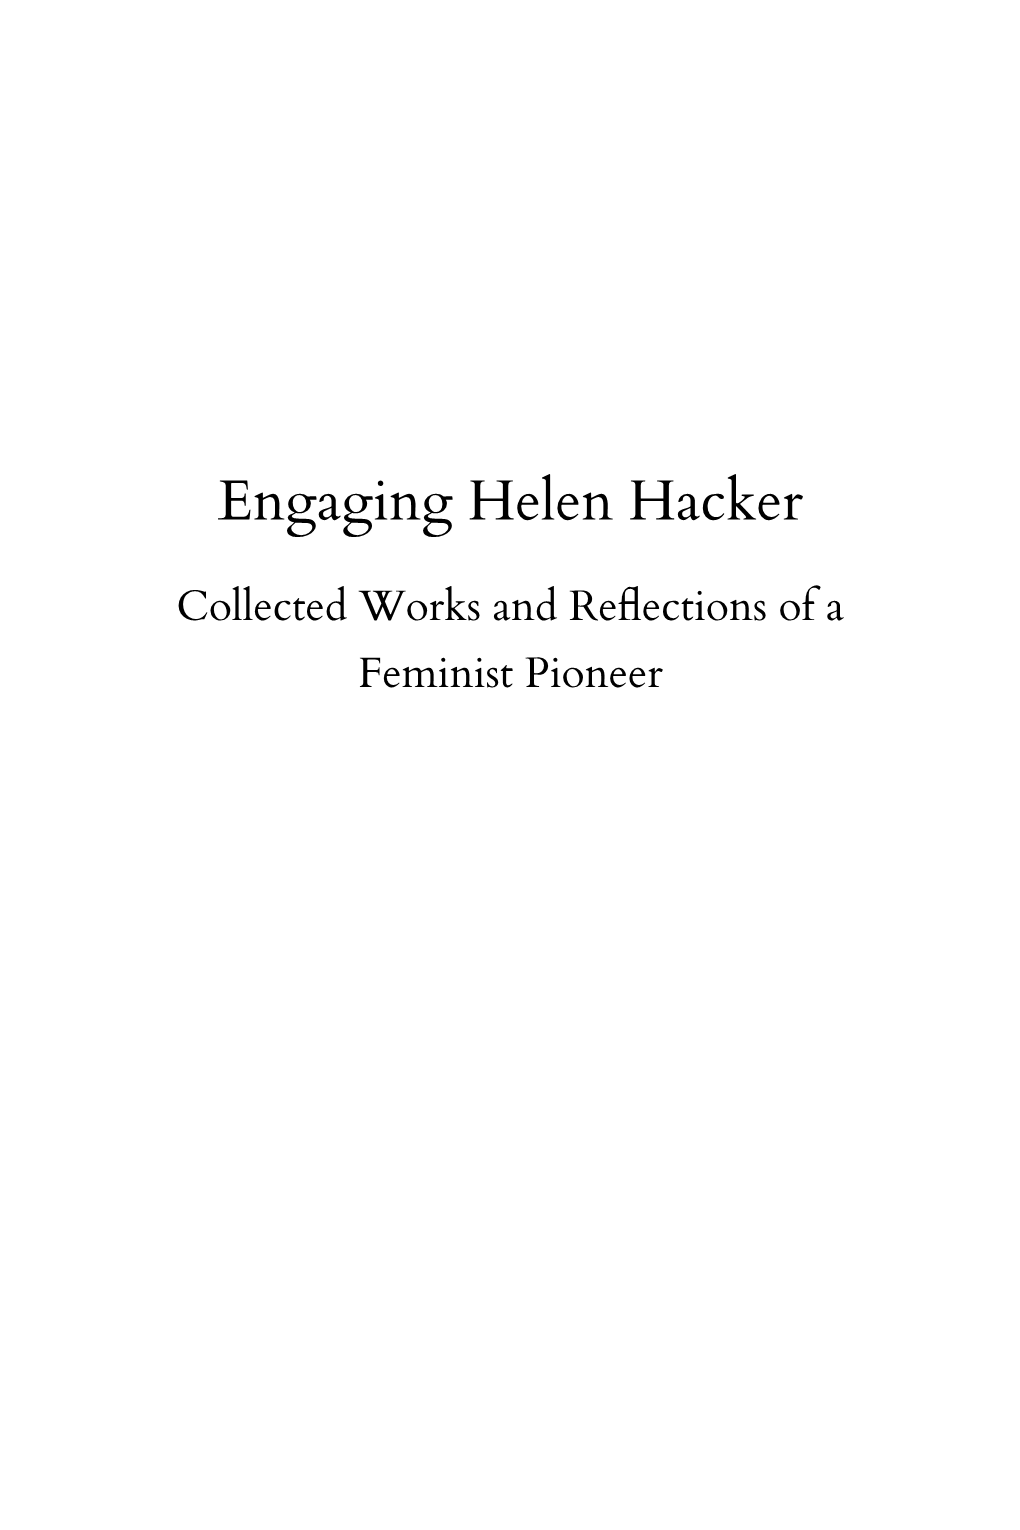 Engaging Helen Hacker: Collected Works and Reflections of a Feminist